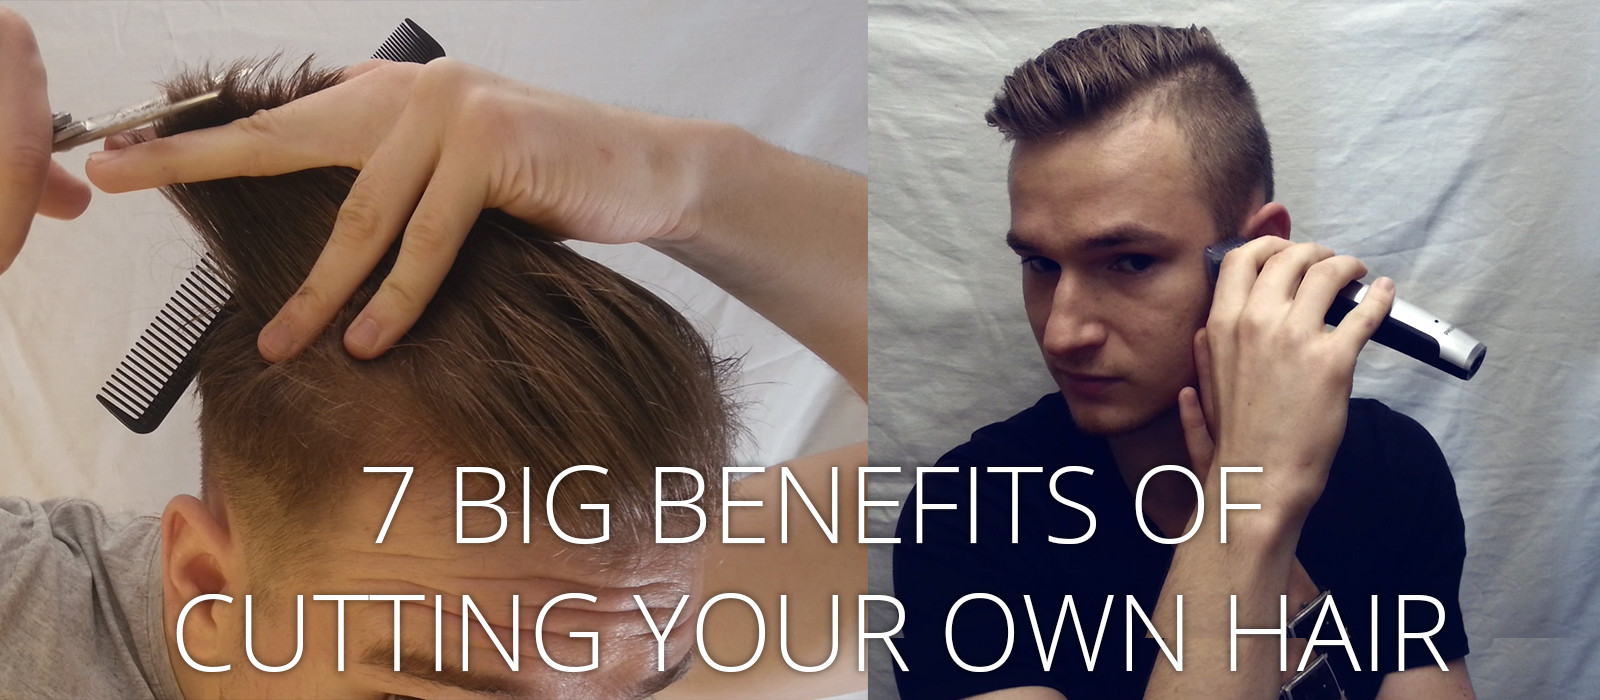 Should I Cut My Own Hair Male
 7 Big Benefits Cutting Your Own Hair